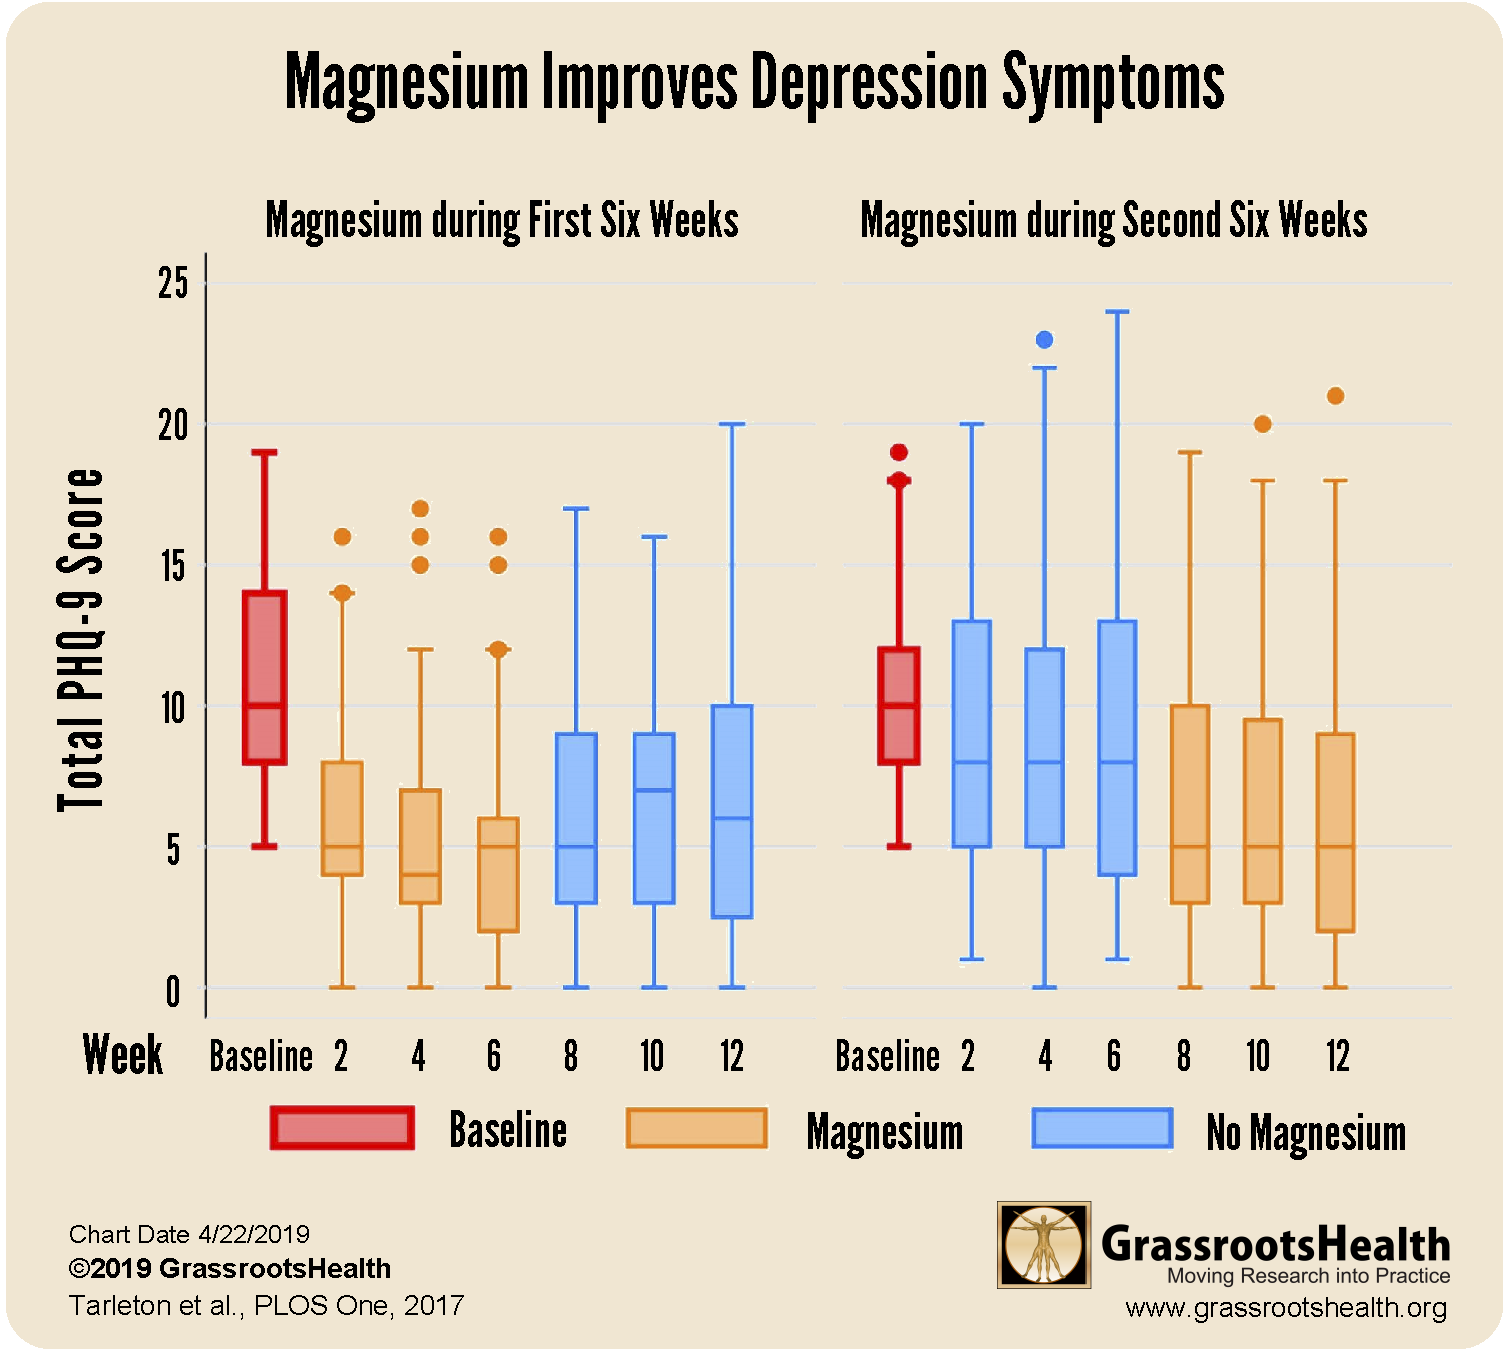 Magnesium for Depression, Magnesium For Depression: What is the Best Form?